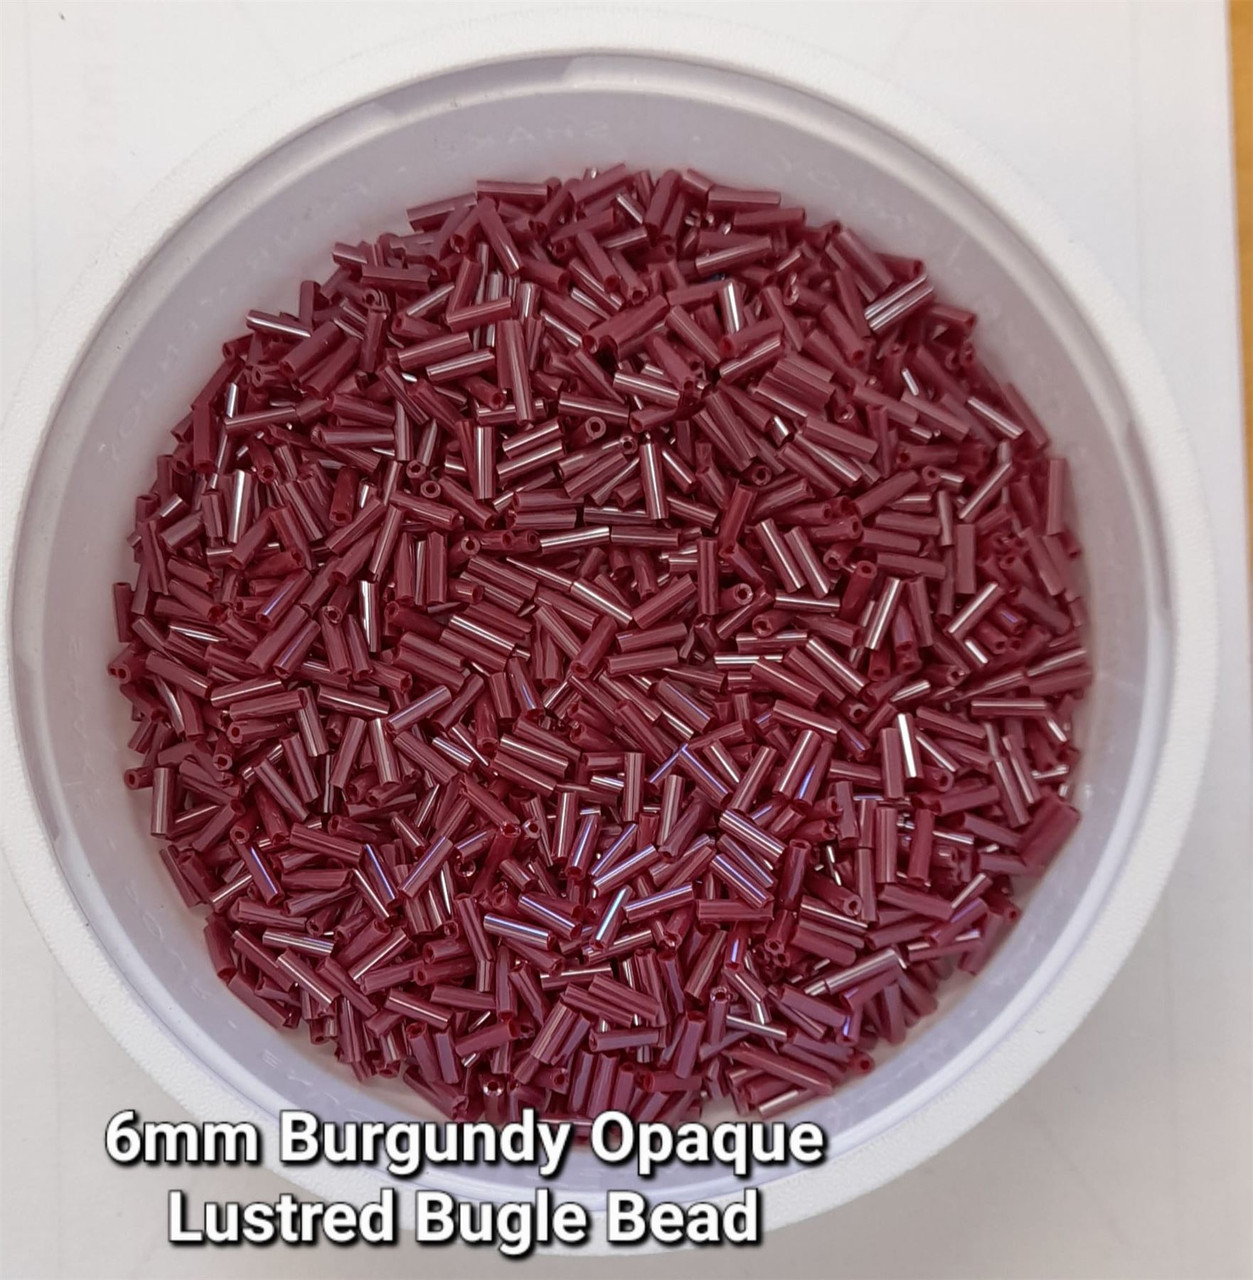 50g glass bugle beads - Burgundy Opaque Lustred - approx 6mm